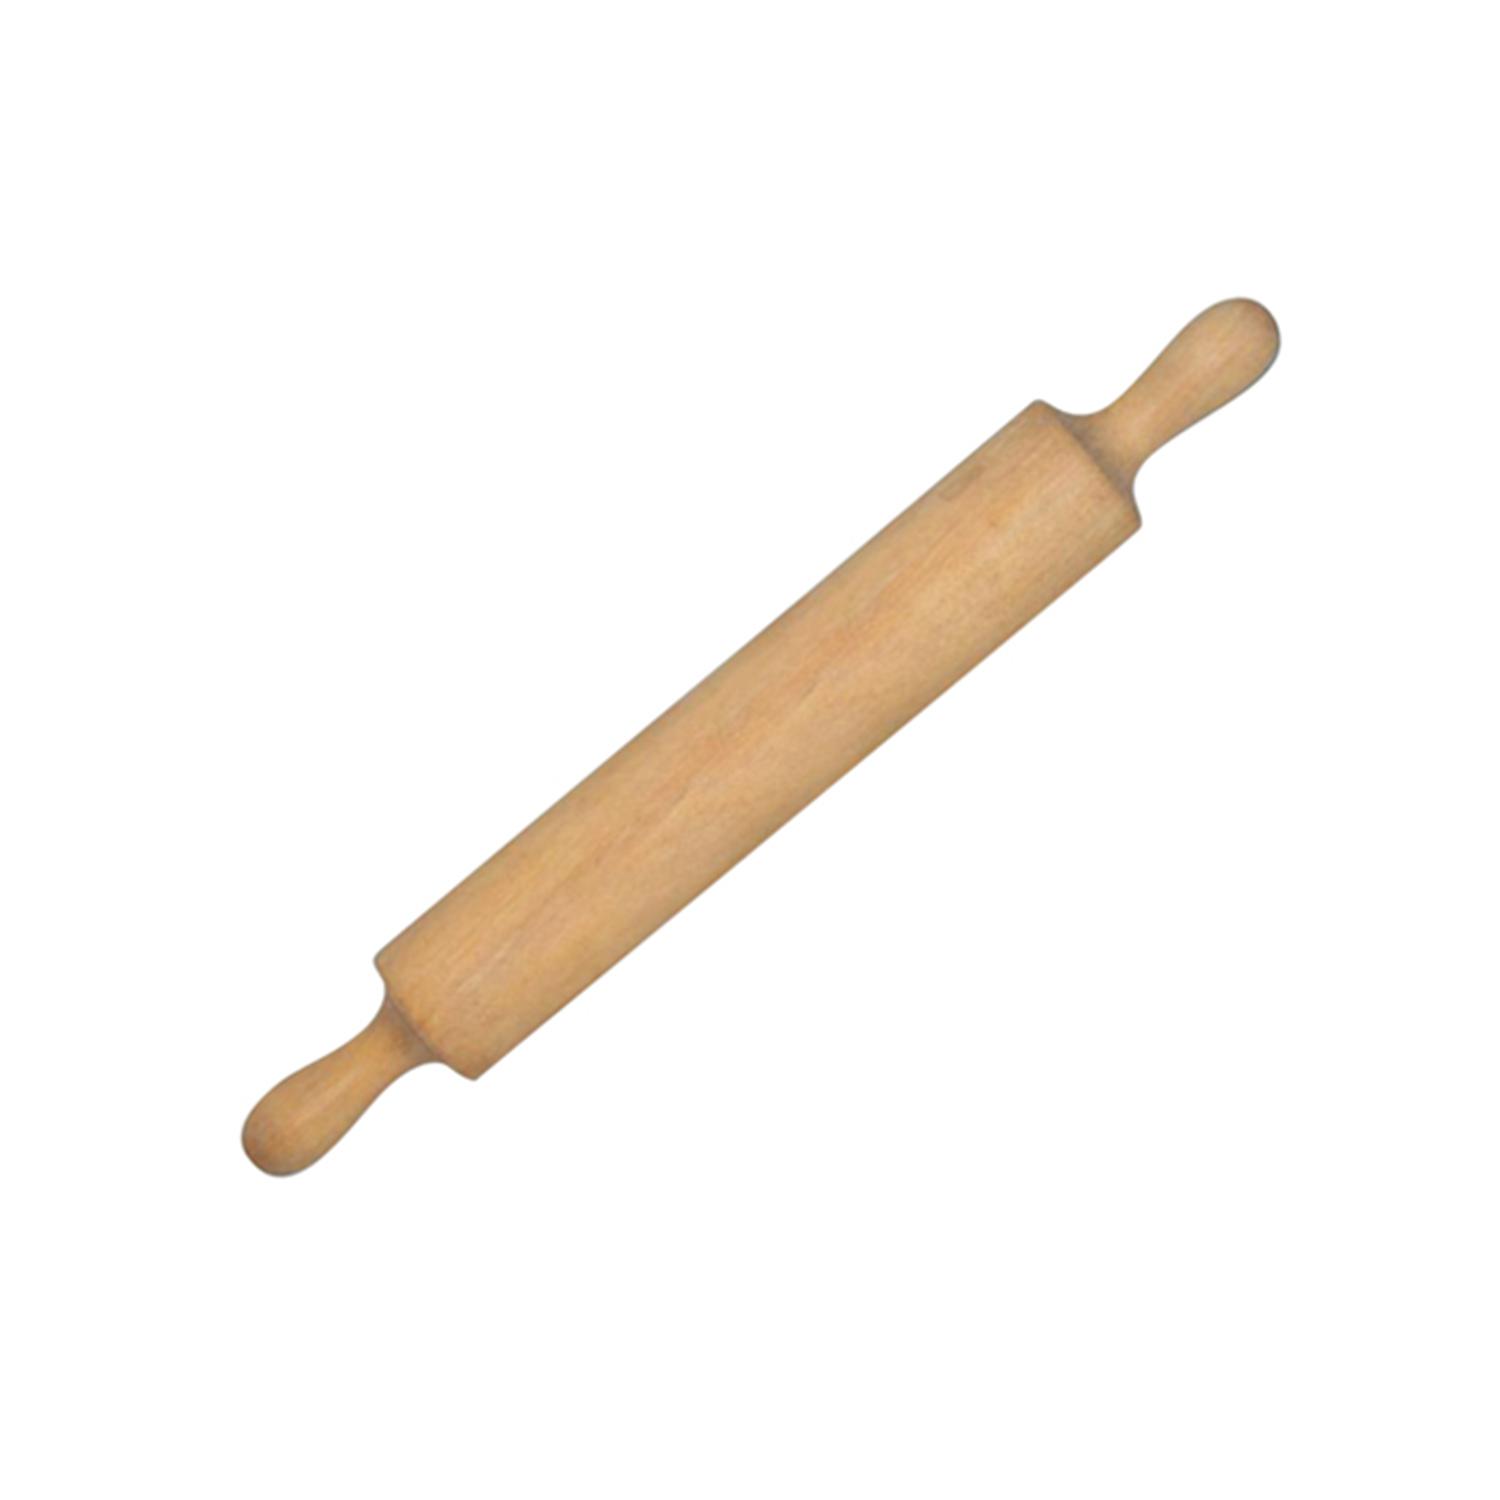 3X3X23 INCHES WOODEN ROLLING PIN PLAIN